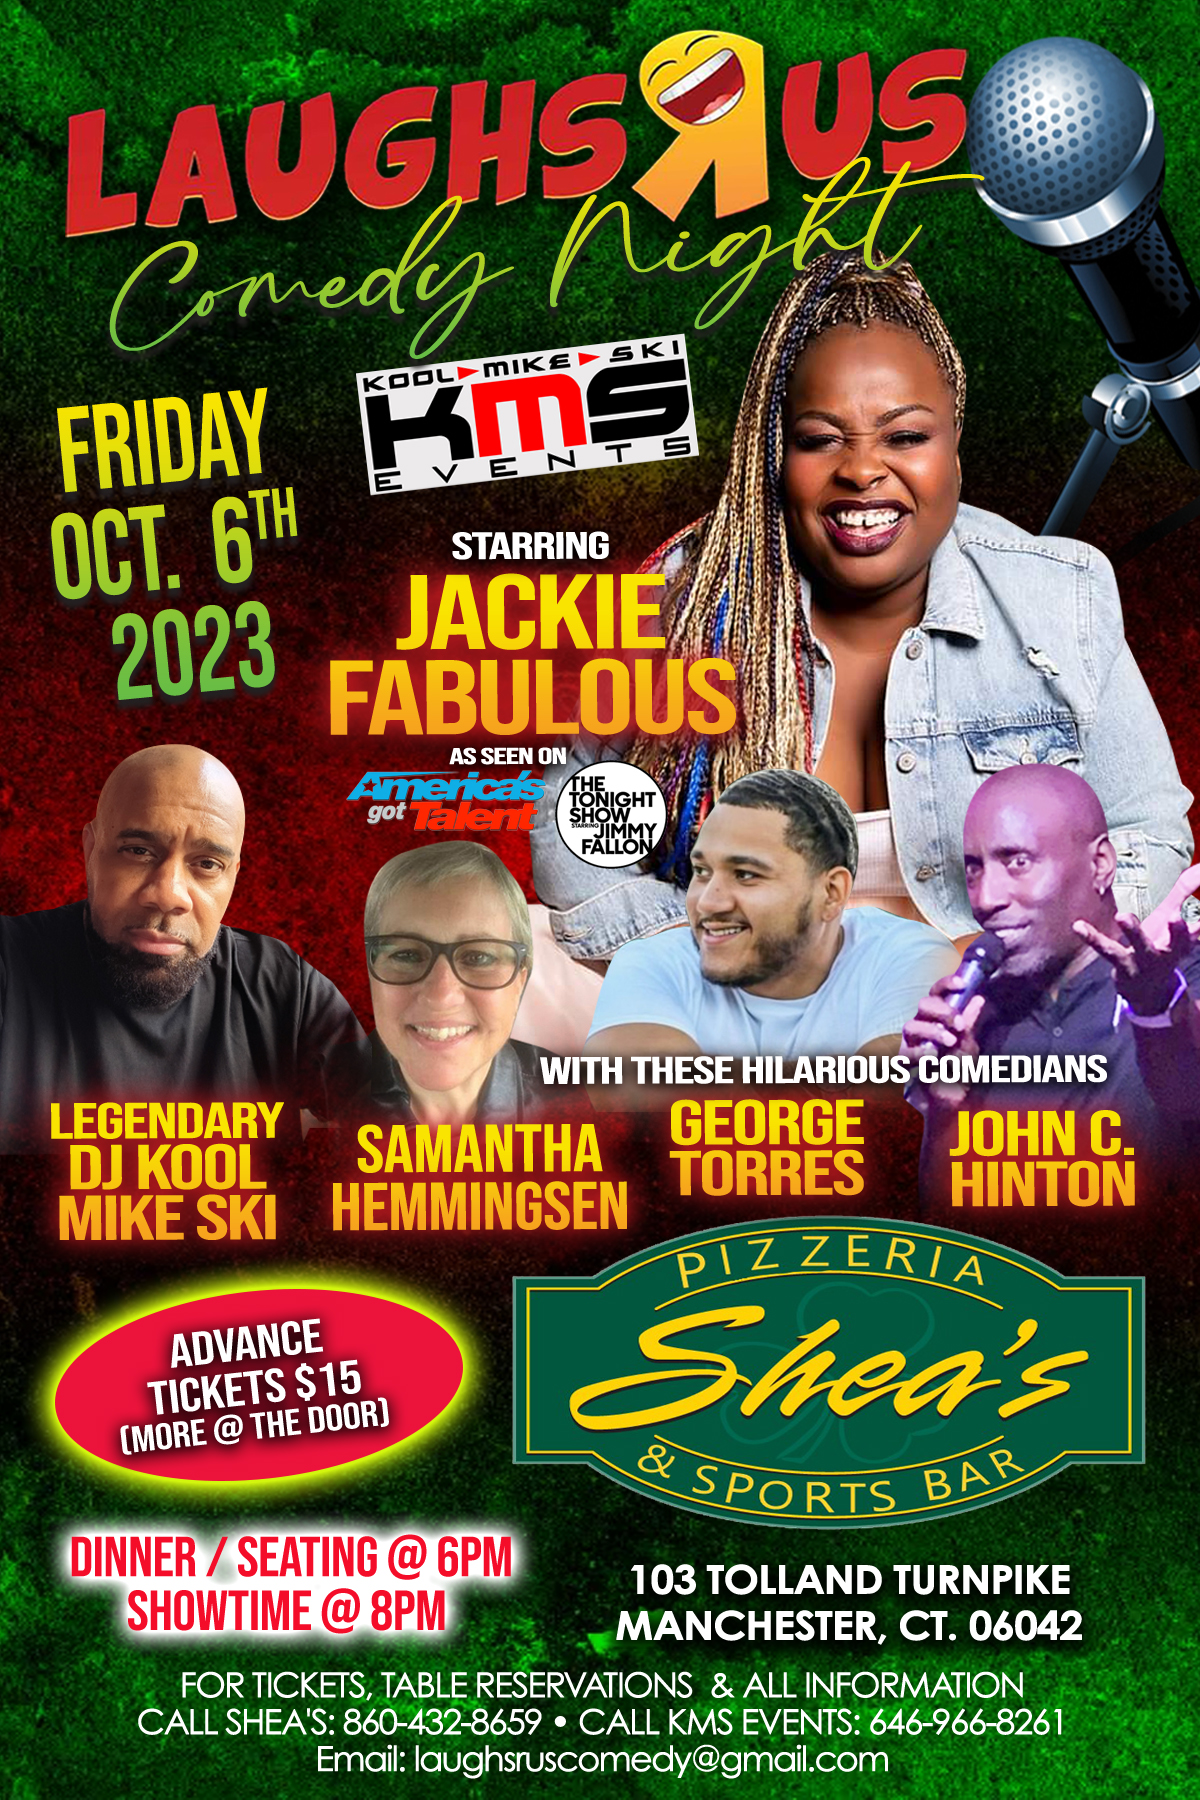 LAUGHS R US COMEDY NIGHT STARRING JACKIE FABULOUS,